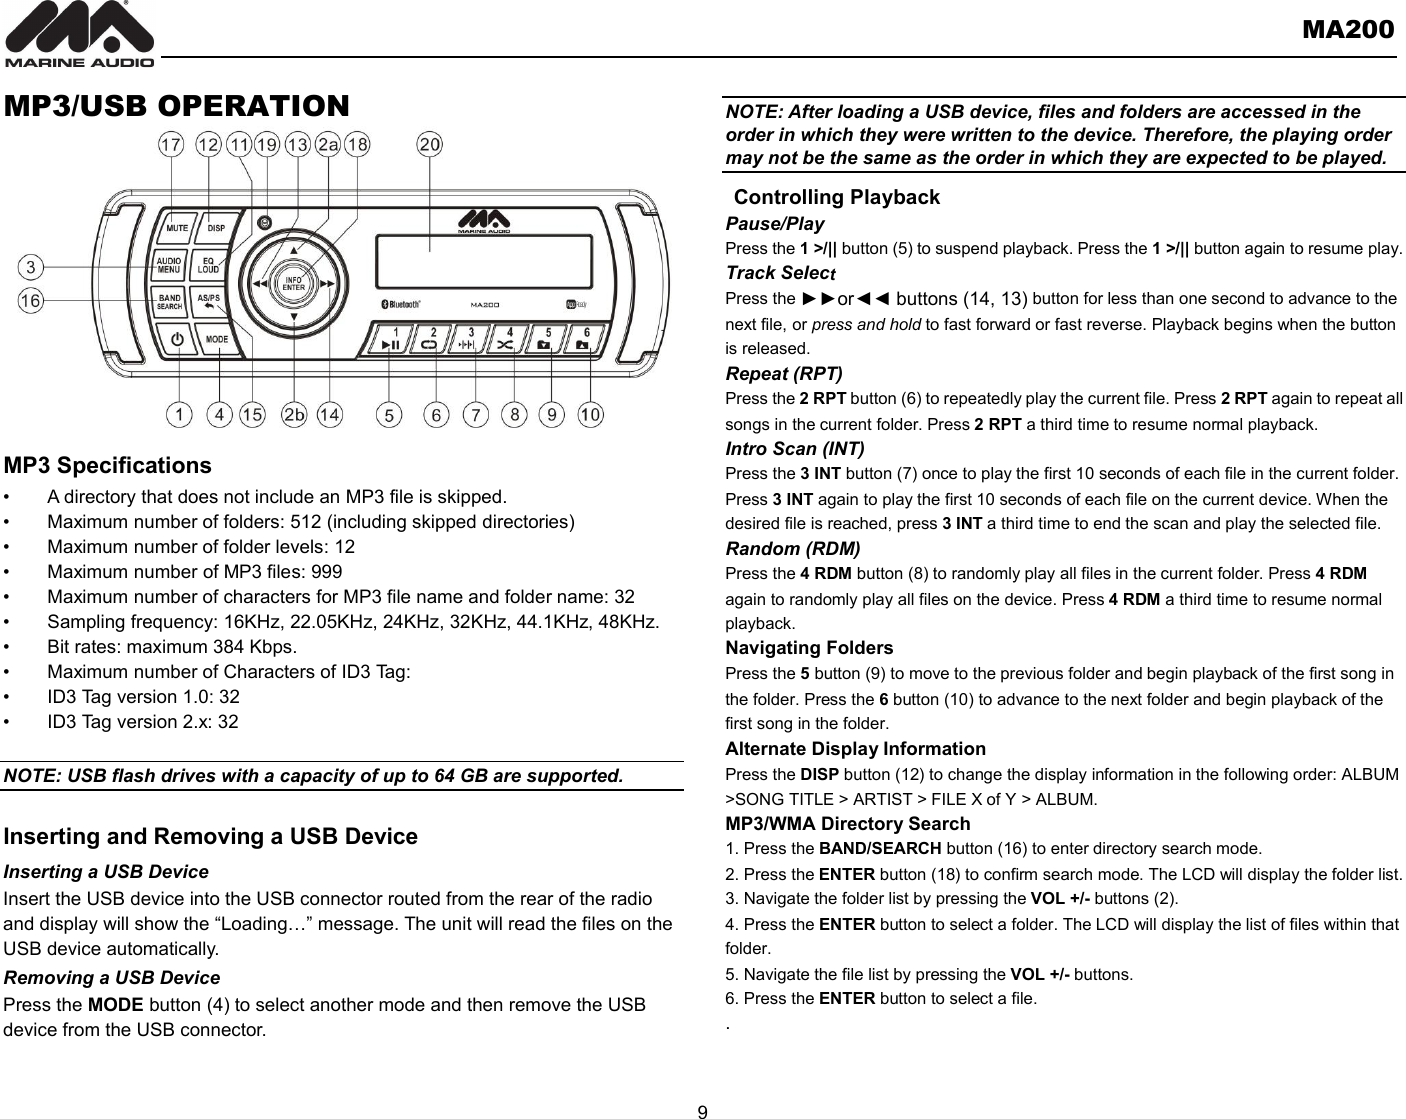       MA200  9  MP3/USB OPERATION          MP3 Specifications •  A directory that does not include an MP3 file is skipped. •  Maximum number of folders: 512 (including skipped directories) •  Maximum number of folder levels: 12 •  Maximum number of MP3 files: 999 •  Maximum number of characters for MP3 file name and folder name: 32 •  Sampling frequency: 16KHz, 22.05KHz, 24KHz, 32KHz, 44.1KHz, 48KHz. •  Bit rates: maximum 384 Kbps. •  Maximum number of Characters of ID3 Tag: •  ID3 Tag version 1.0: 32 •  ID3 Tag version 2.x: 32  NOTE: USB flash drives with a capacity of up to 64 GB are supported.    Inserting and Removing a USB Device Inserting a USB Device Insert the USB device into the USB connector routed from the rear of the radio and display will show the “Loading…” message. The unit will read the files on the USB device automatically. Removing a USB Device Press the MODE button (4) to select another mode and then remove the USB device from the USB connector.  NOTE: After loading a USB device, files and folders are accessed in the order in which they were written to the device. Therefore, the playing order may not be the same as the order in which they are expected to be played.  Controlling Playback Pause/Play Press the 1 &gt;/|| button (5) to suspend playback. Press the 1 &gt;/|| button again to resume play. Track Select Press the ►►or◄◄ buttons (14, 13) button for less than one second to advance to the next file, or press and hold to fast forward or fast reverse. Playback begins when the button is released. Repeat (RPT) Press the 2 RPT button (6) to repeatedly play the current file. Press 2 RPT again to repeat all songs in the current folder. Press 2 RPT a third time to resume normal playback. Intro Scan (INT) Press the 3 INT button (7) once to play the first 10 seconds of each file in the current folder. Press 3 INT again to play the first 10 seconds of each file on the current device. When the desired file is reached, press 3 INT a third time to end the scan and play the selected file. Random (RDM) Press the 4 RDM button (8) to randomly play all files in the current folder. Press 4 RDM again to randomly play all files on the device. Press 4 RDM a third time to resume normal playback. Navigating Folders Press the 5 button (9) to move to the previous folder and begin playback of the first song in the folder. Press the 6 button (10) to advance to the next folder and begin playback of the first song in the folder. Alternate Display Information Press the DISP button (12) to change the display information in the following order: ALBUM &gt;SONG TITLE &gt; ARTIST &gt; FILE X of Y &gt; ALBUM. MP3/WMA Directory Search 1. Press the BAND/SEARCH button (16) to enter directory search mode. 2. Press the ENTER button (18) to confirm search mode. The LCD will display the folder list. 3. Navigate the folder list by pressing the VOL +/- buttons (2). 4. Press the ENTER button to select a folder. The LCD will display the list of files within that folder. 5. Navigate the file list by pressing the VOL +/- buttons. 6. Press the ENTER button to select a file. .   